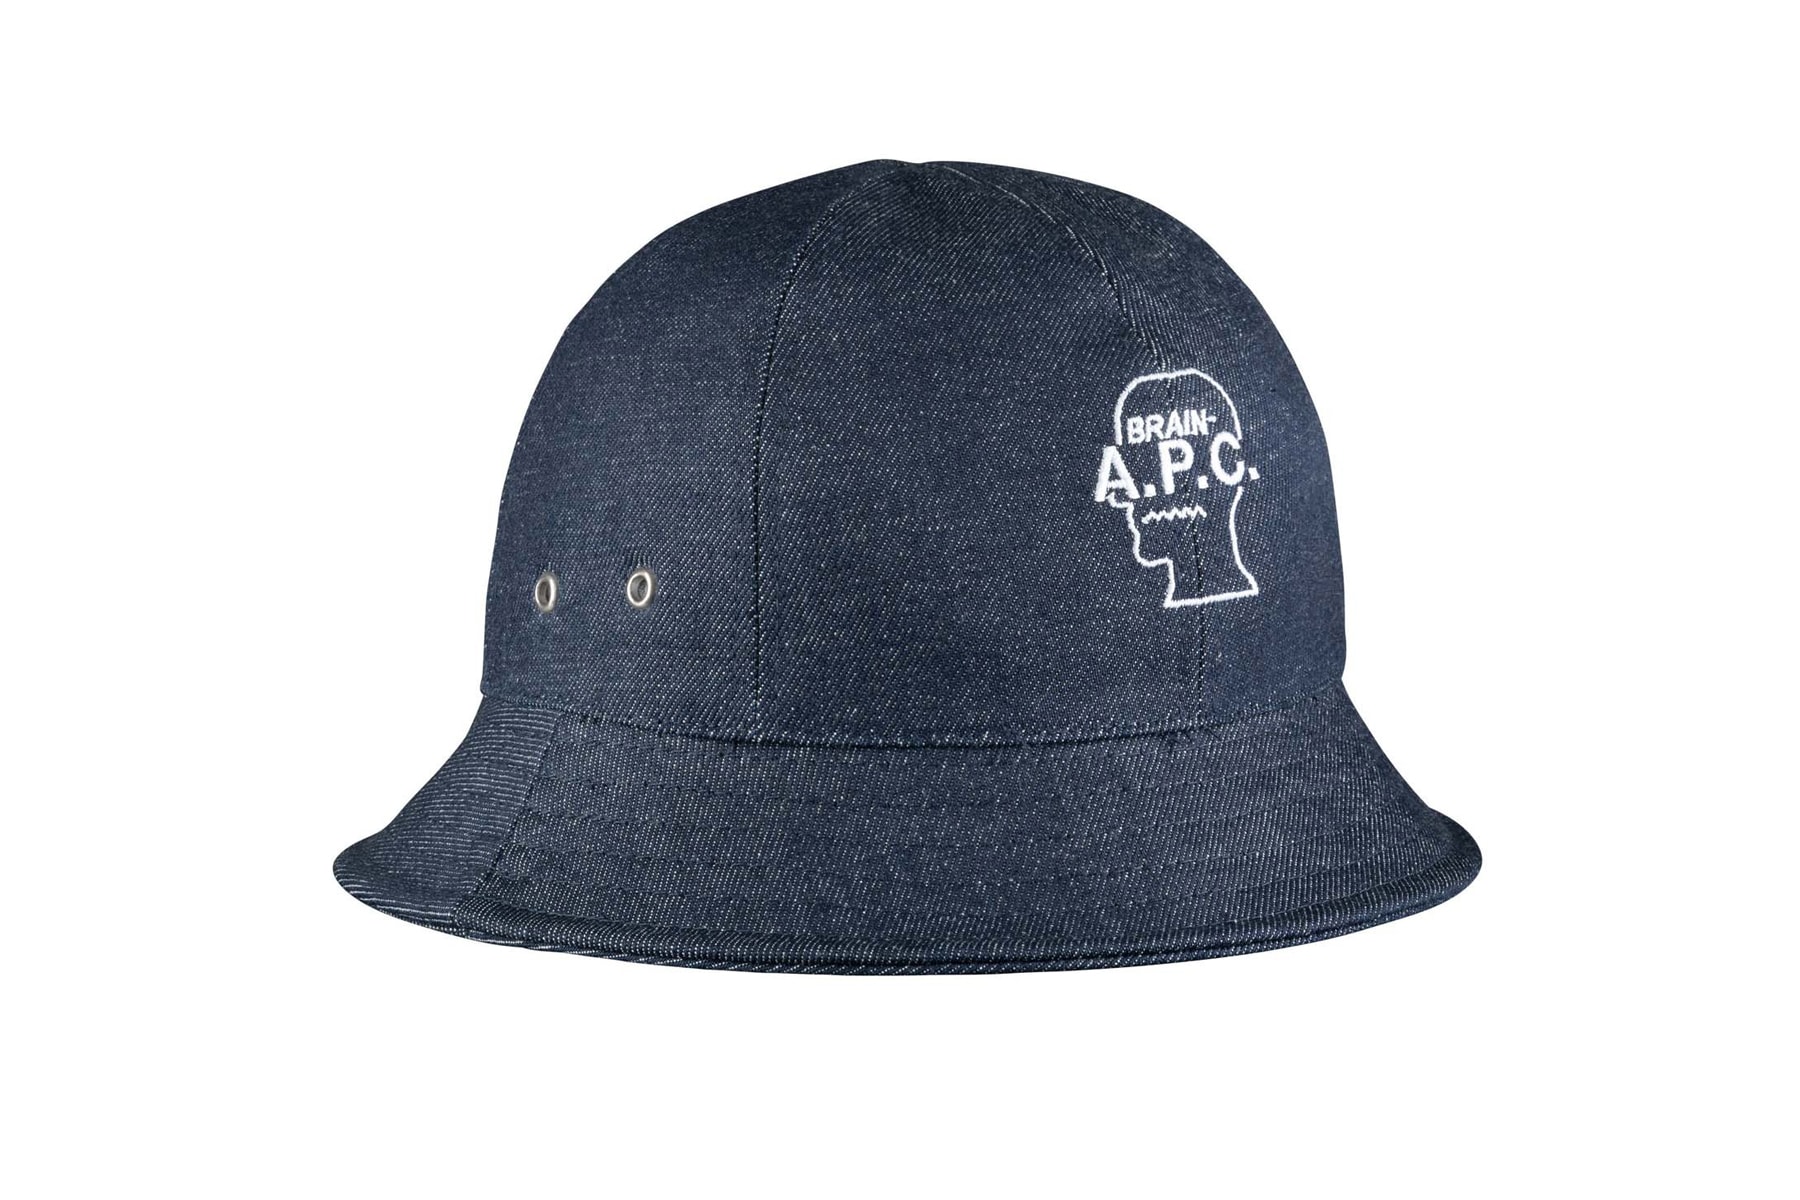 A.P.C. x Brain Dead "Interaction" Capsule fall winter 2019 collection denim hats pants bag tote kyle ng exclusive Silver Lake store los angeles future shock pop up silver lake los angeles la